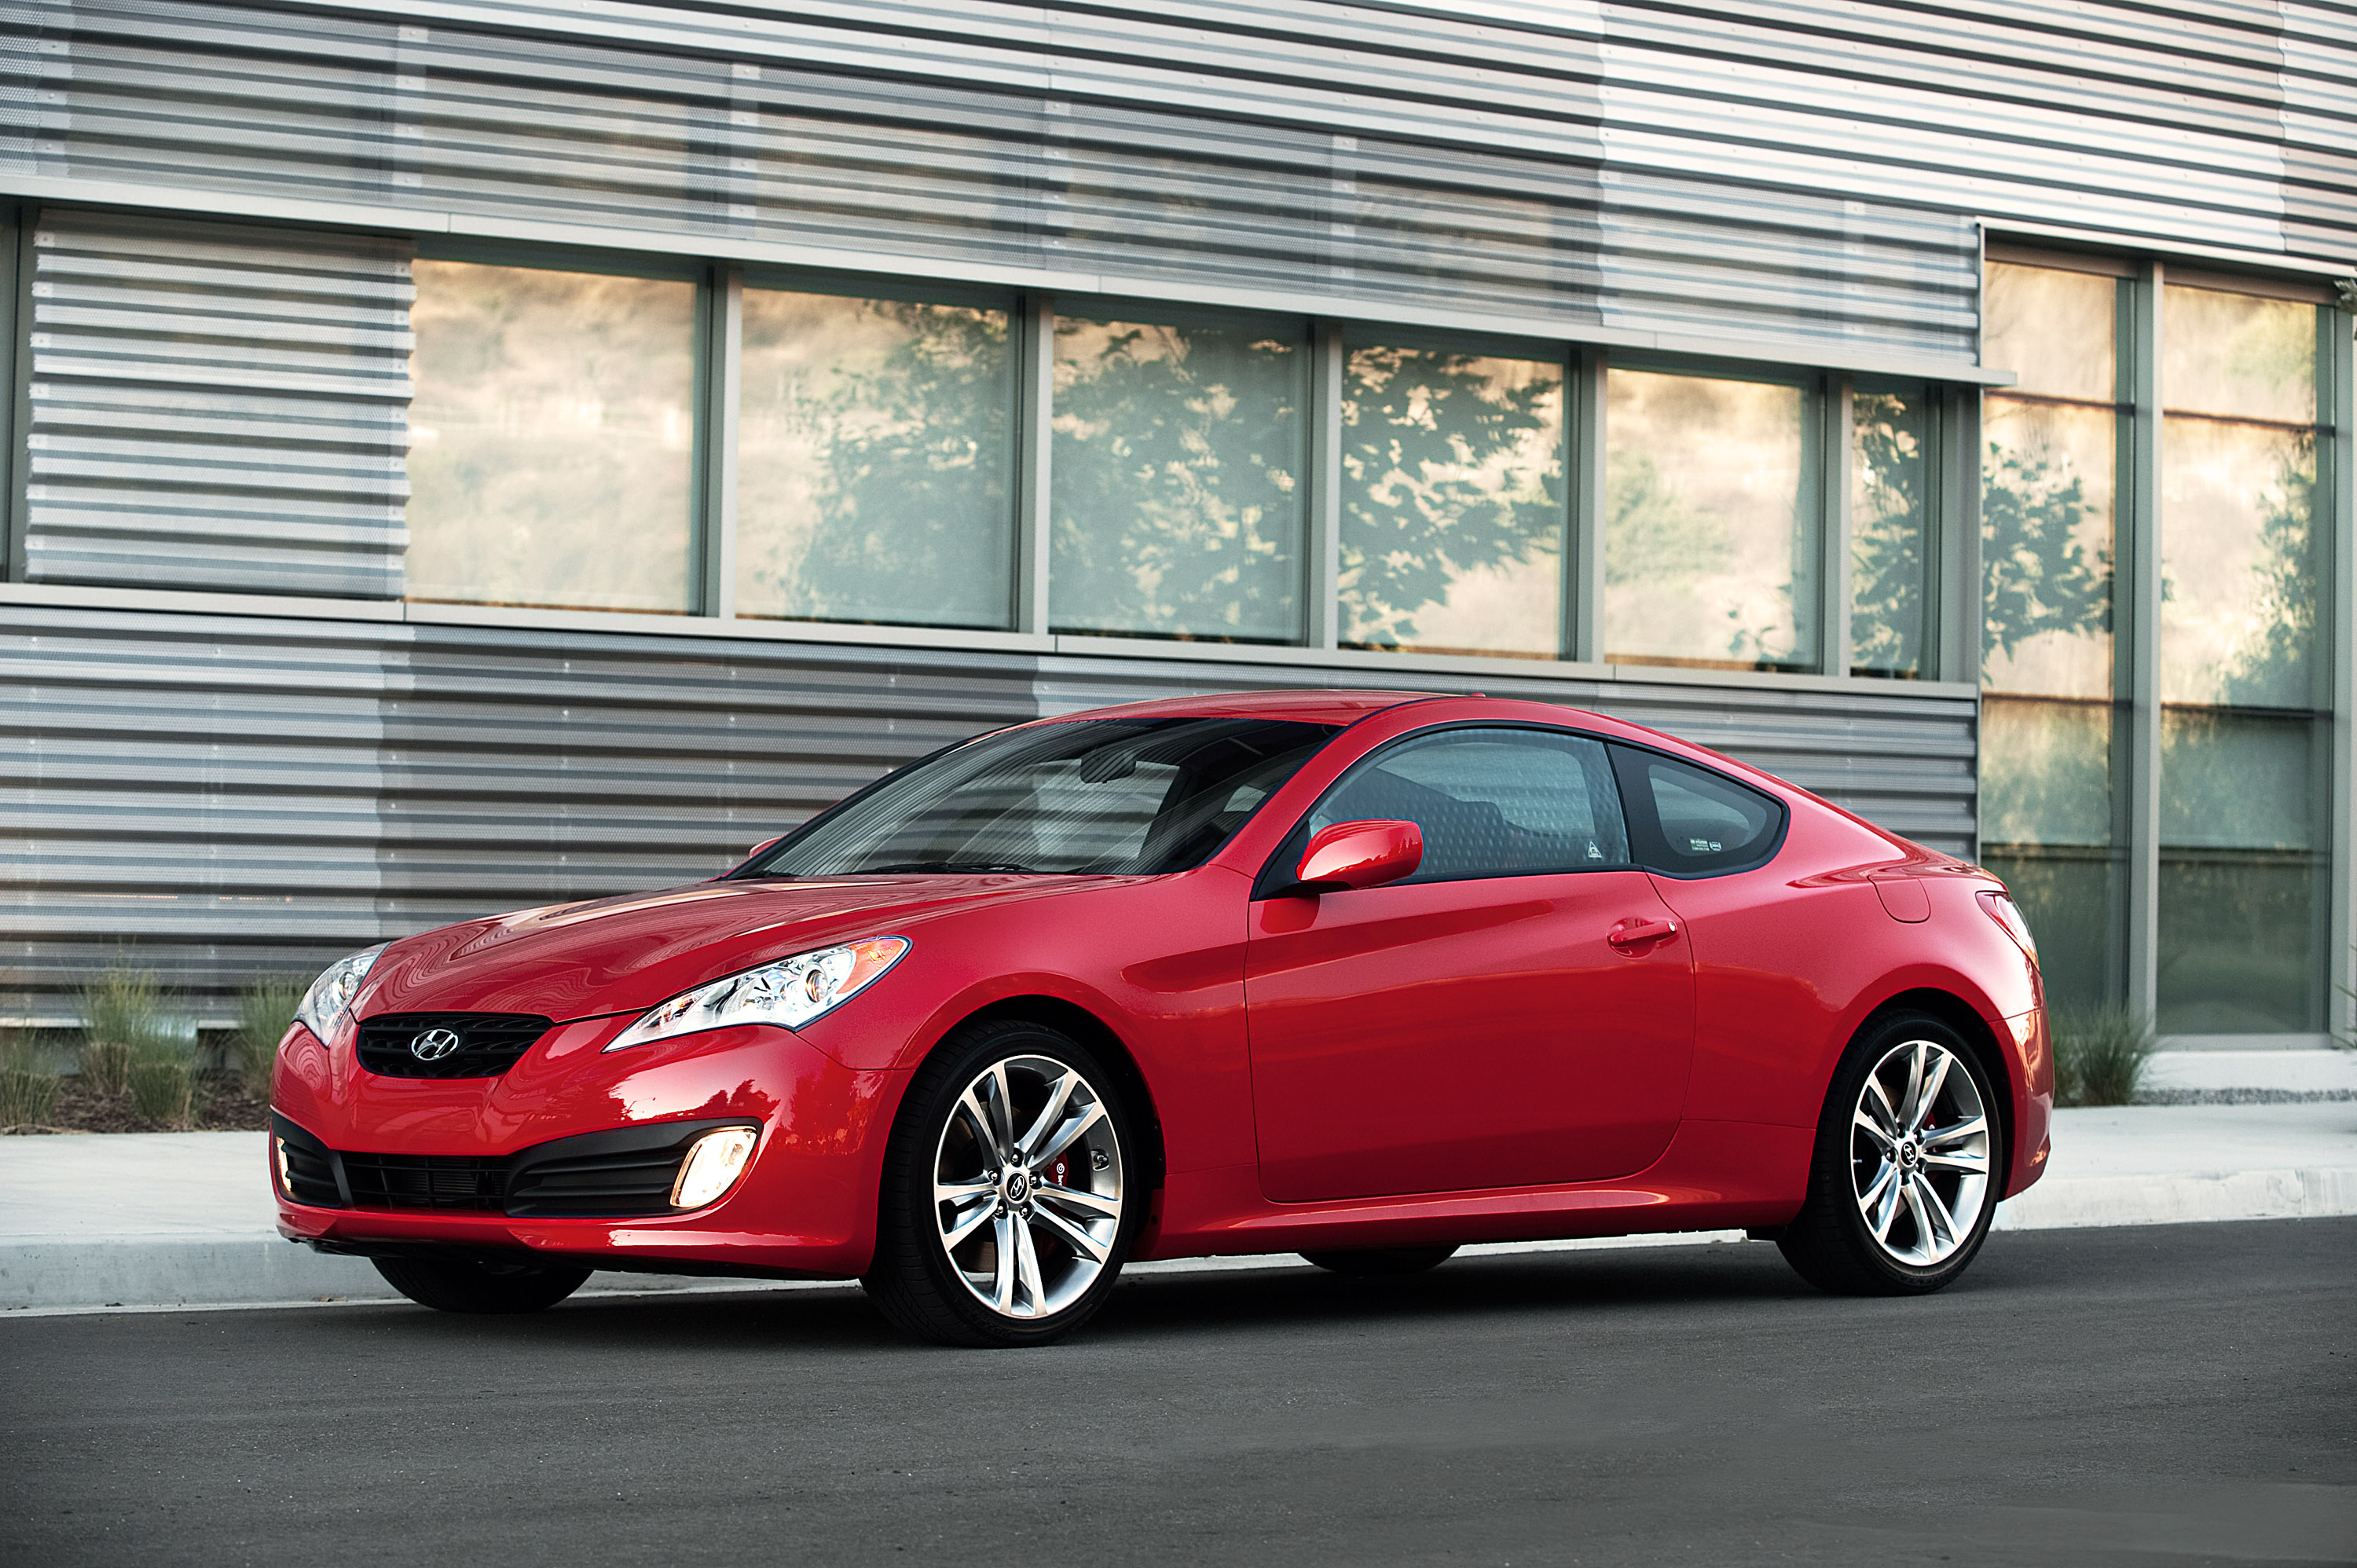 2011 Hyundai Genesis Coupe 3.8 R-Spec priced for the US